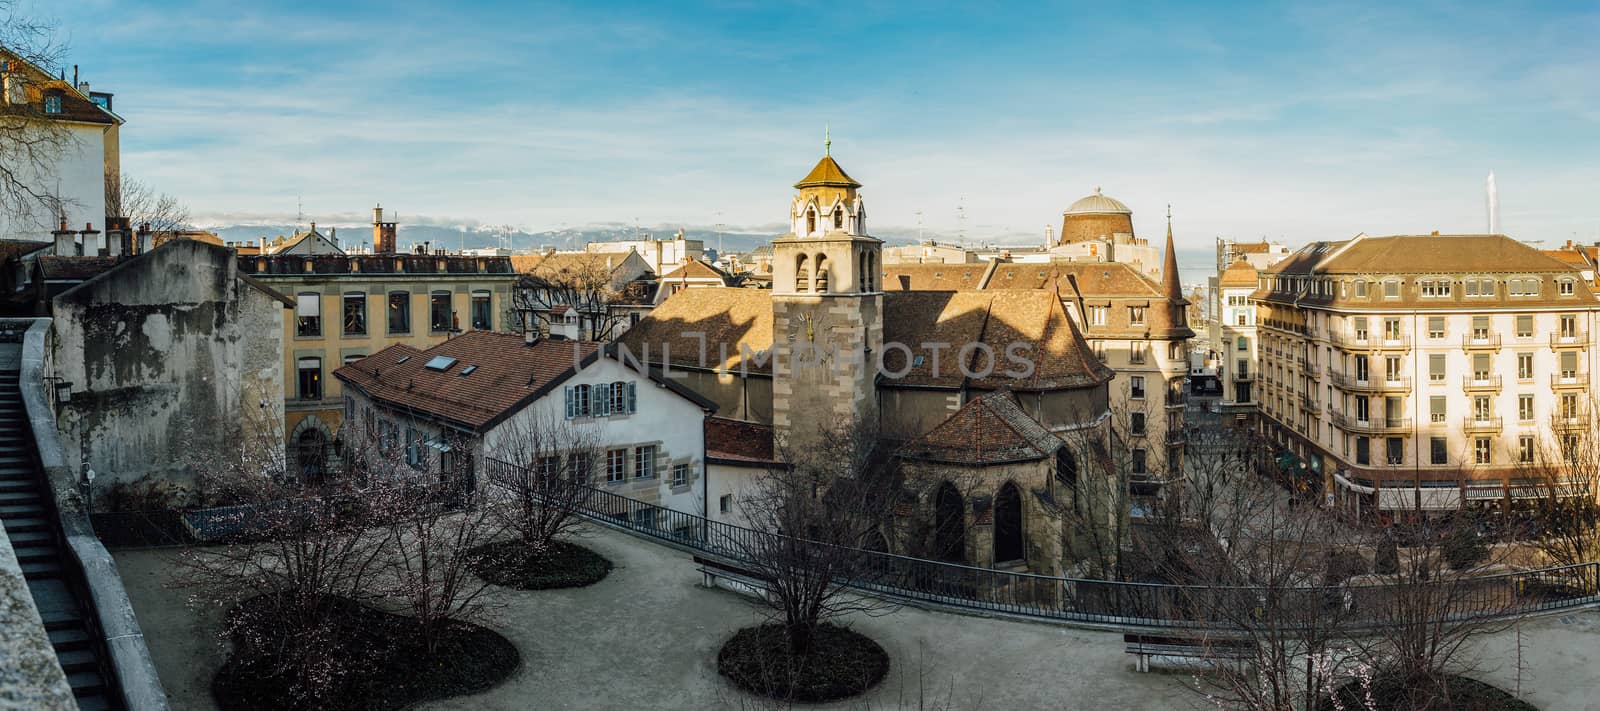 Wide angle view from the old town of Geneva, Switzerland.